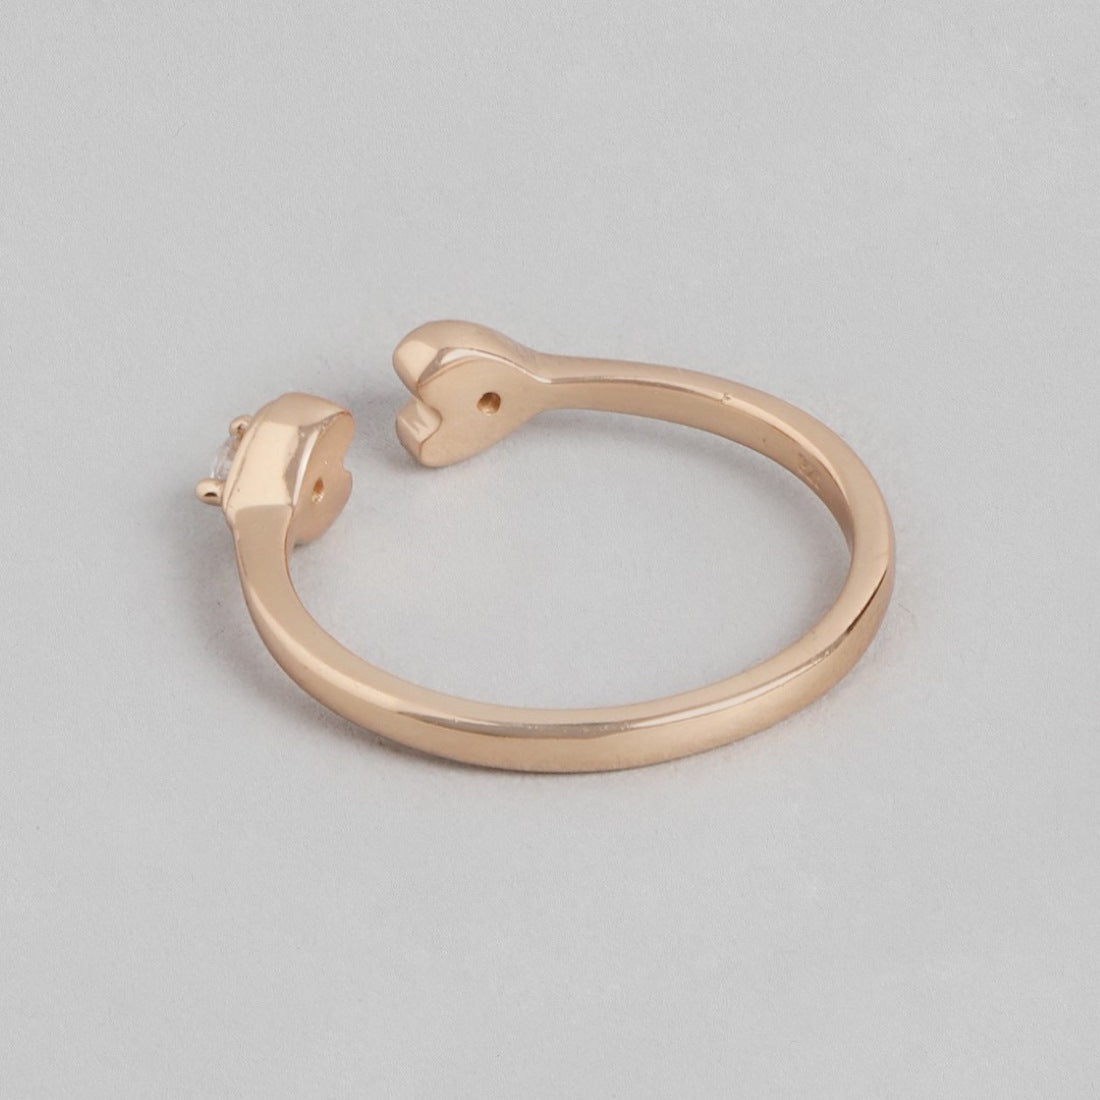 Rosy Affection Rose Gold-Plated 925 Sterling Silver Women's Ring (Adjustable)